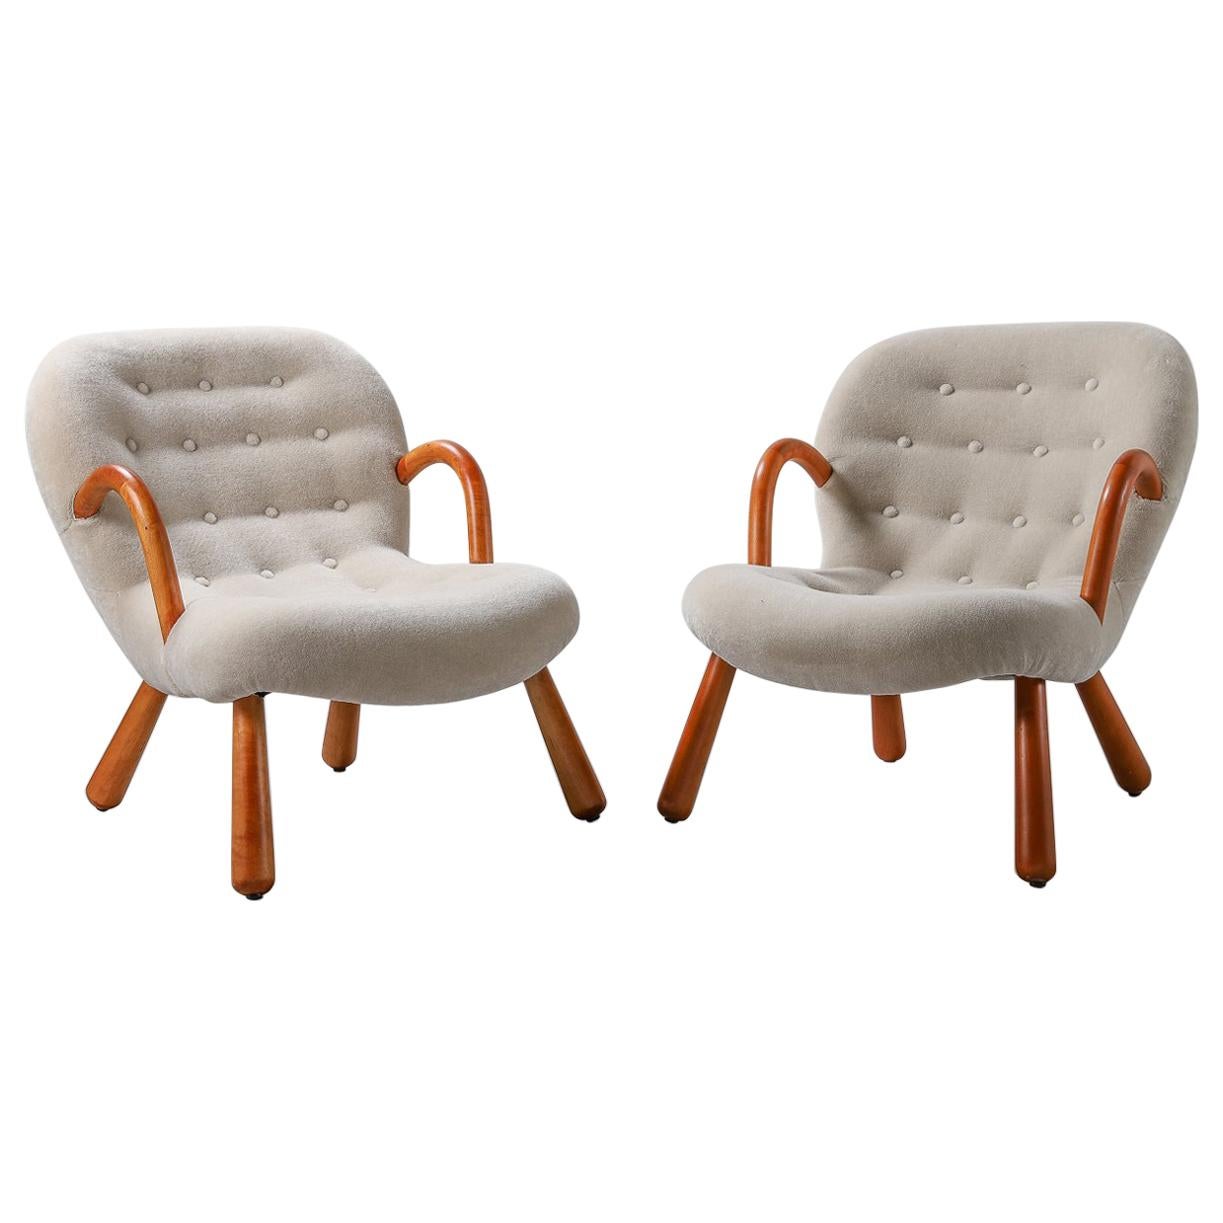 Pair of Clam Chairs by Philip Arctander 1944 in Bespoke Mohair Velvet